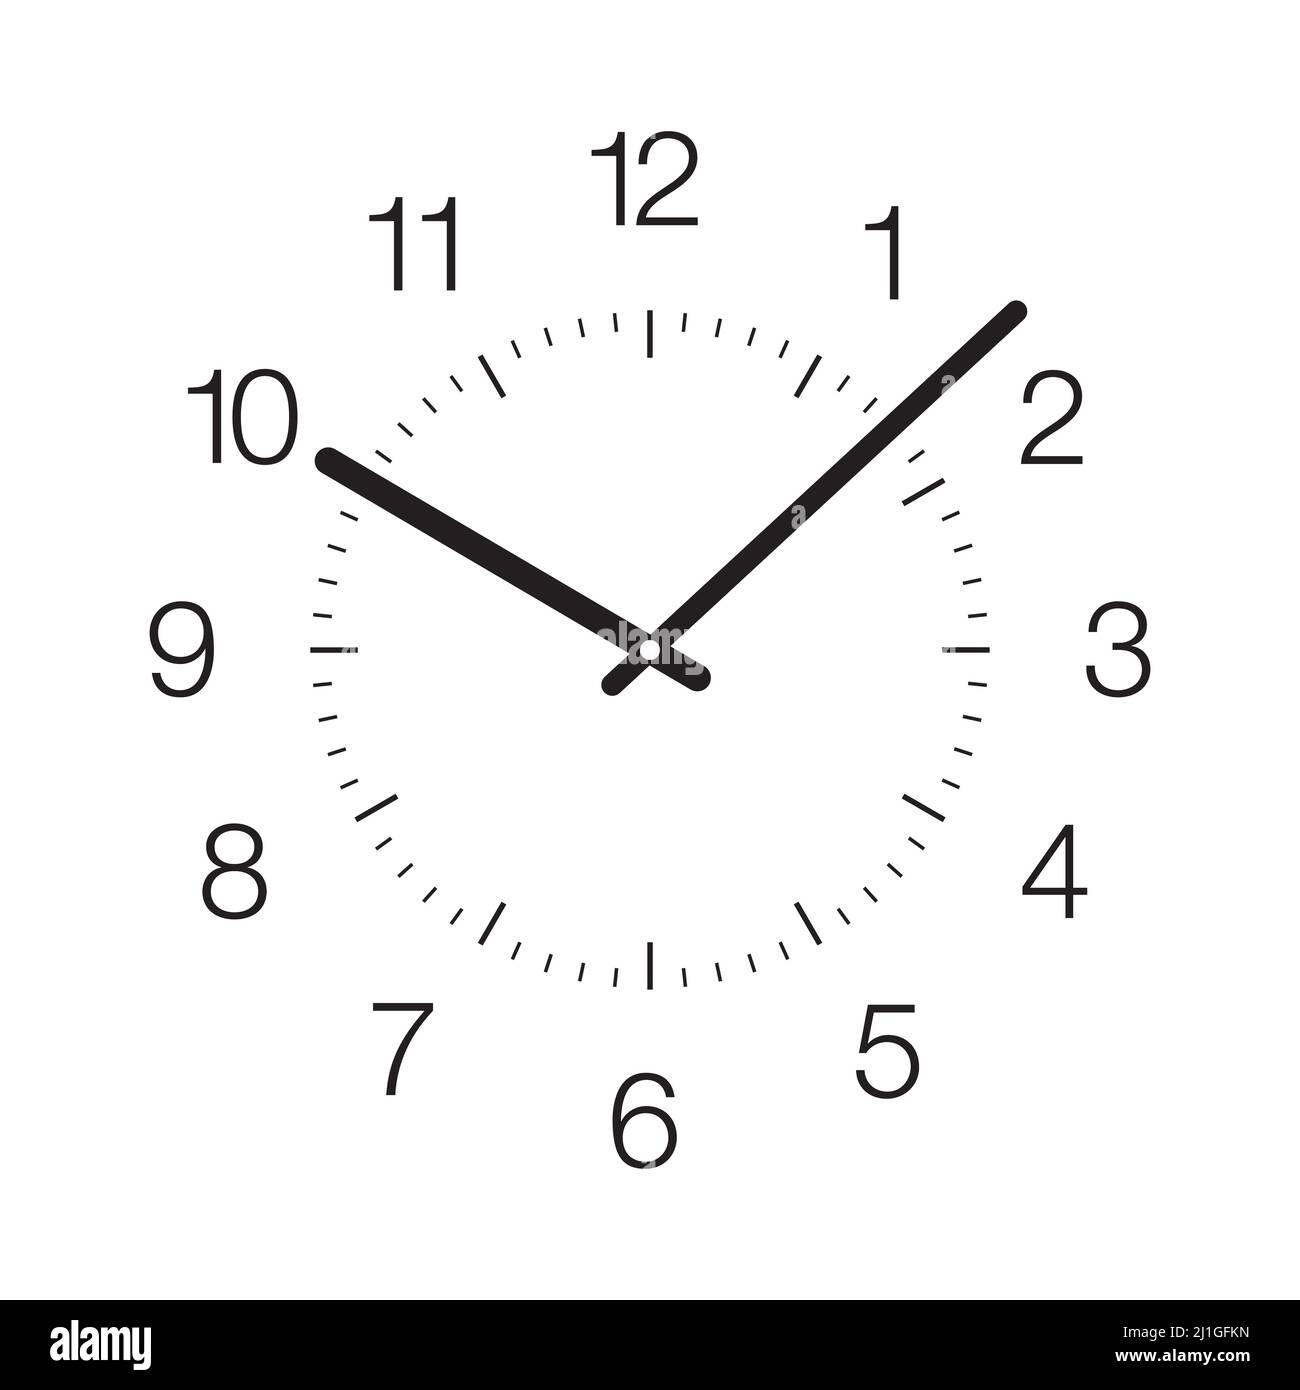 Watch dial isolated on white background. Classical black watch face with numbers and arrows, vector illustration. Stock Vector